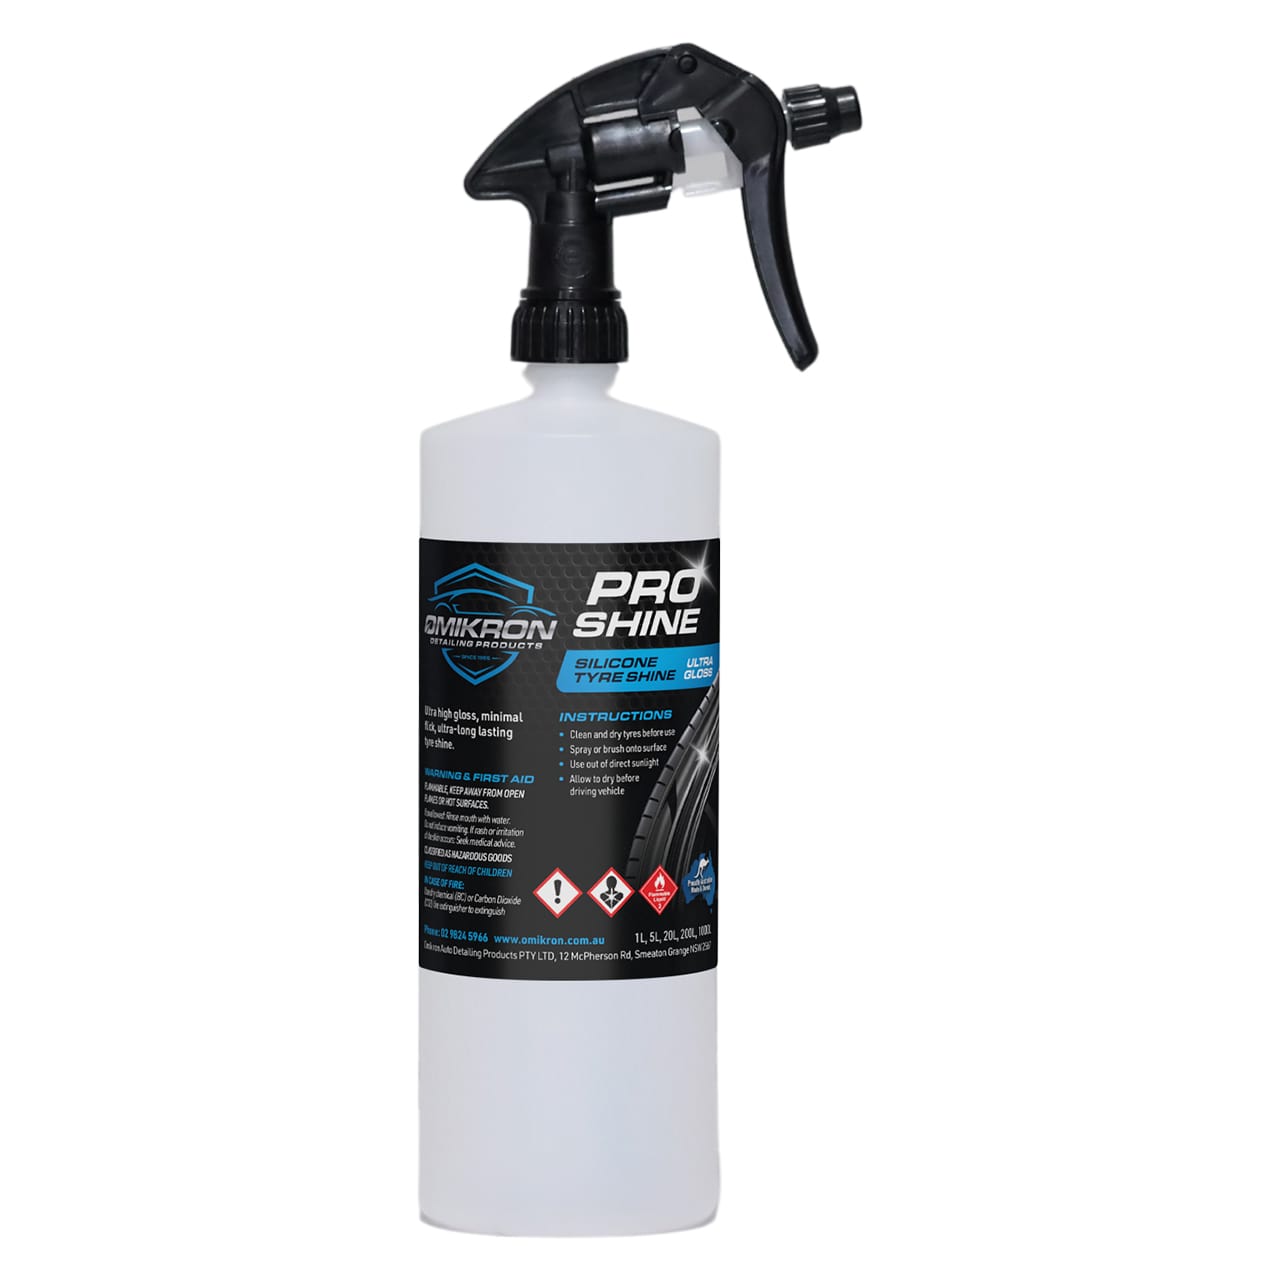 Truck Detailing Products & Supplies, Australia